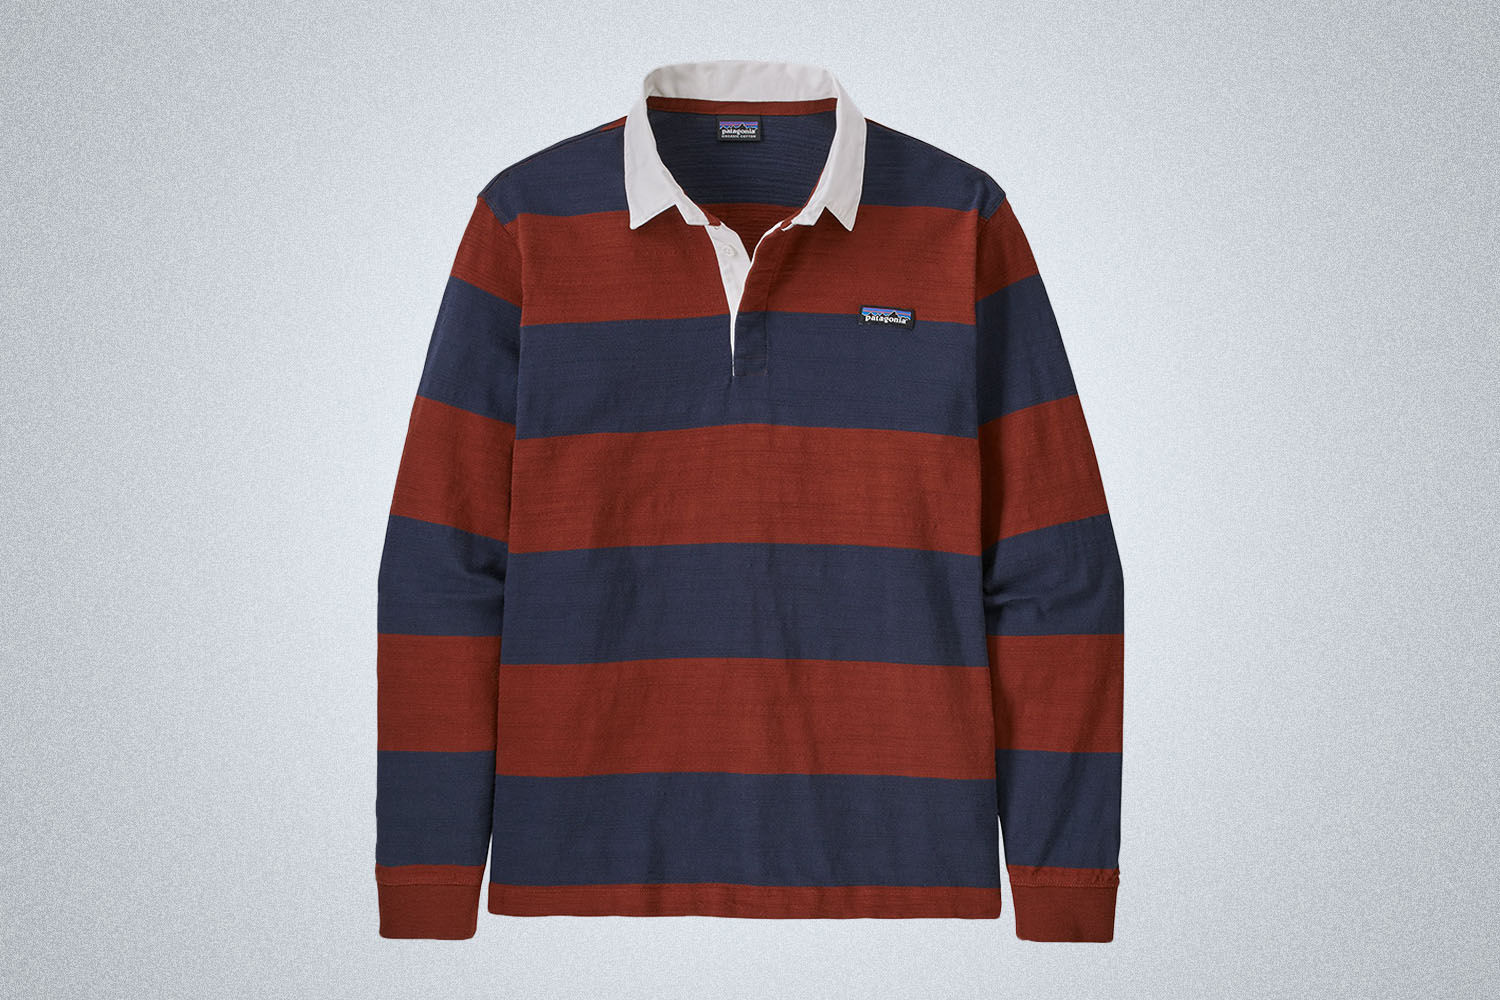 A striped rugby shirt on. gray background